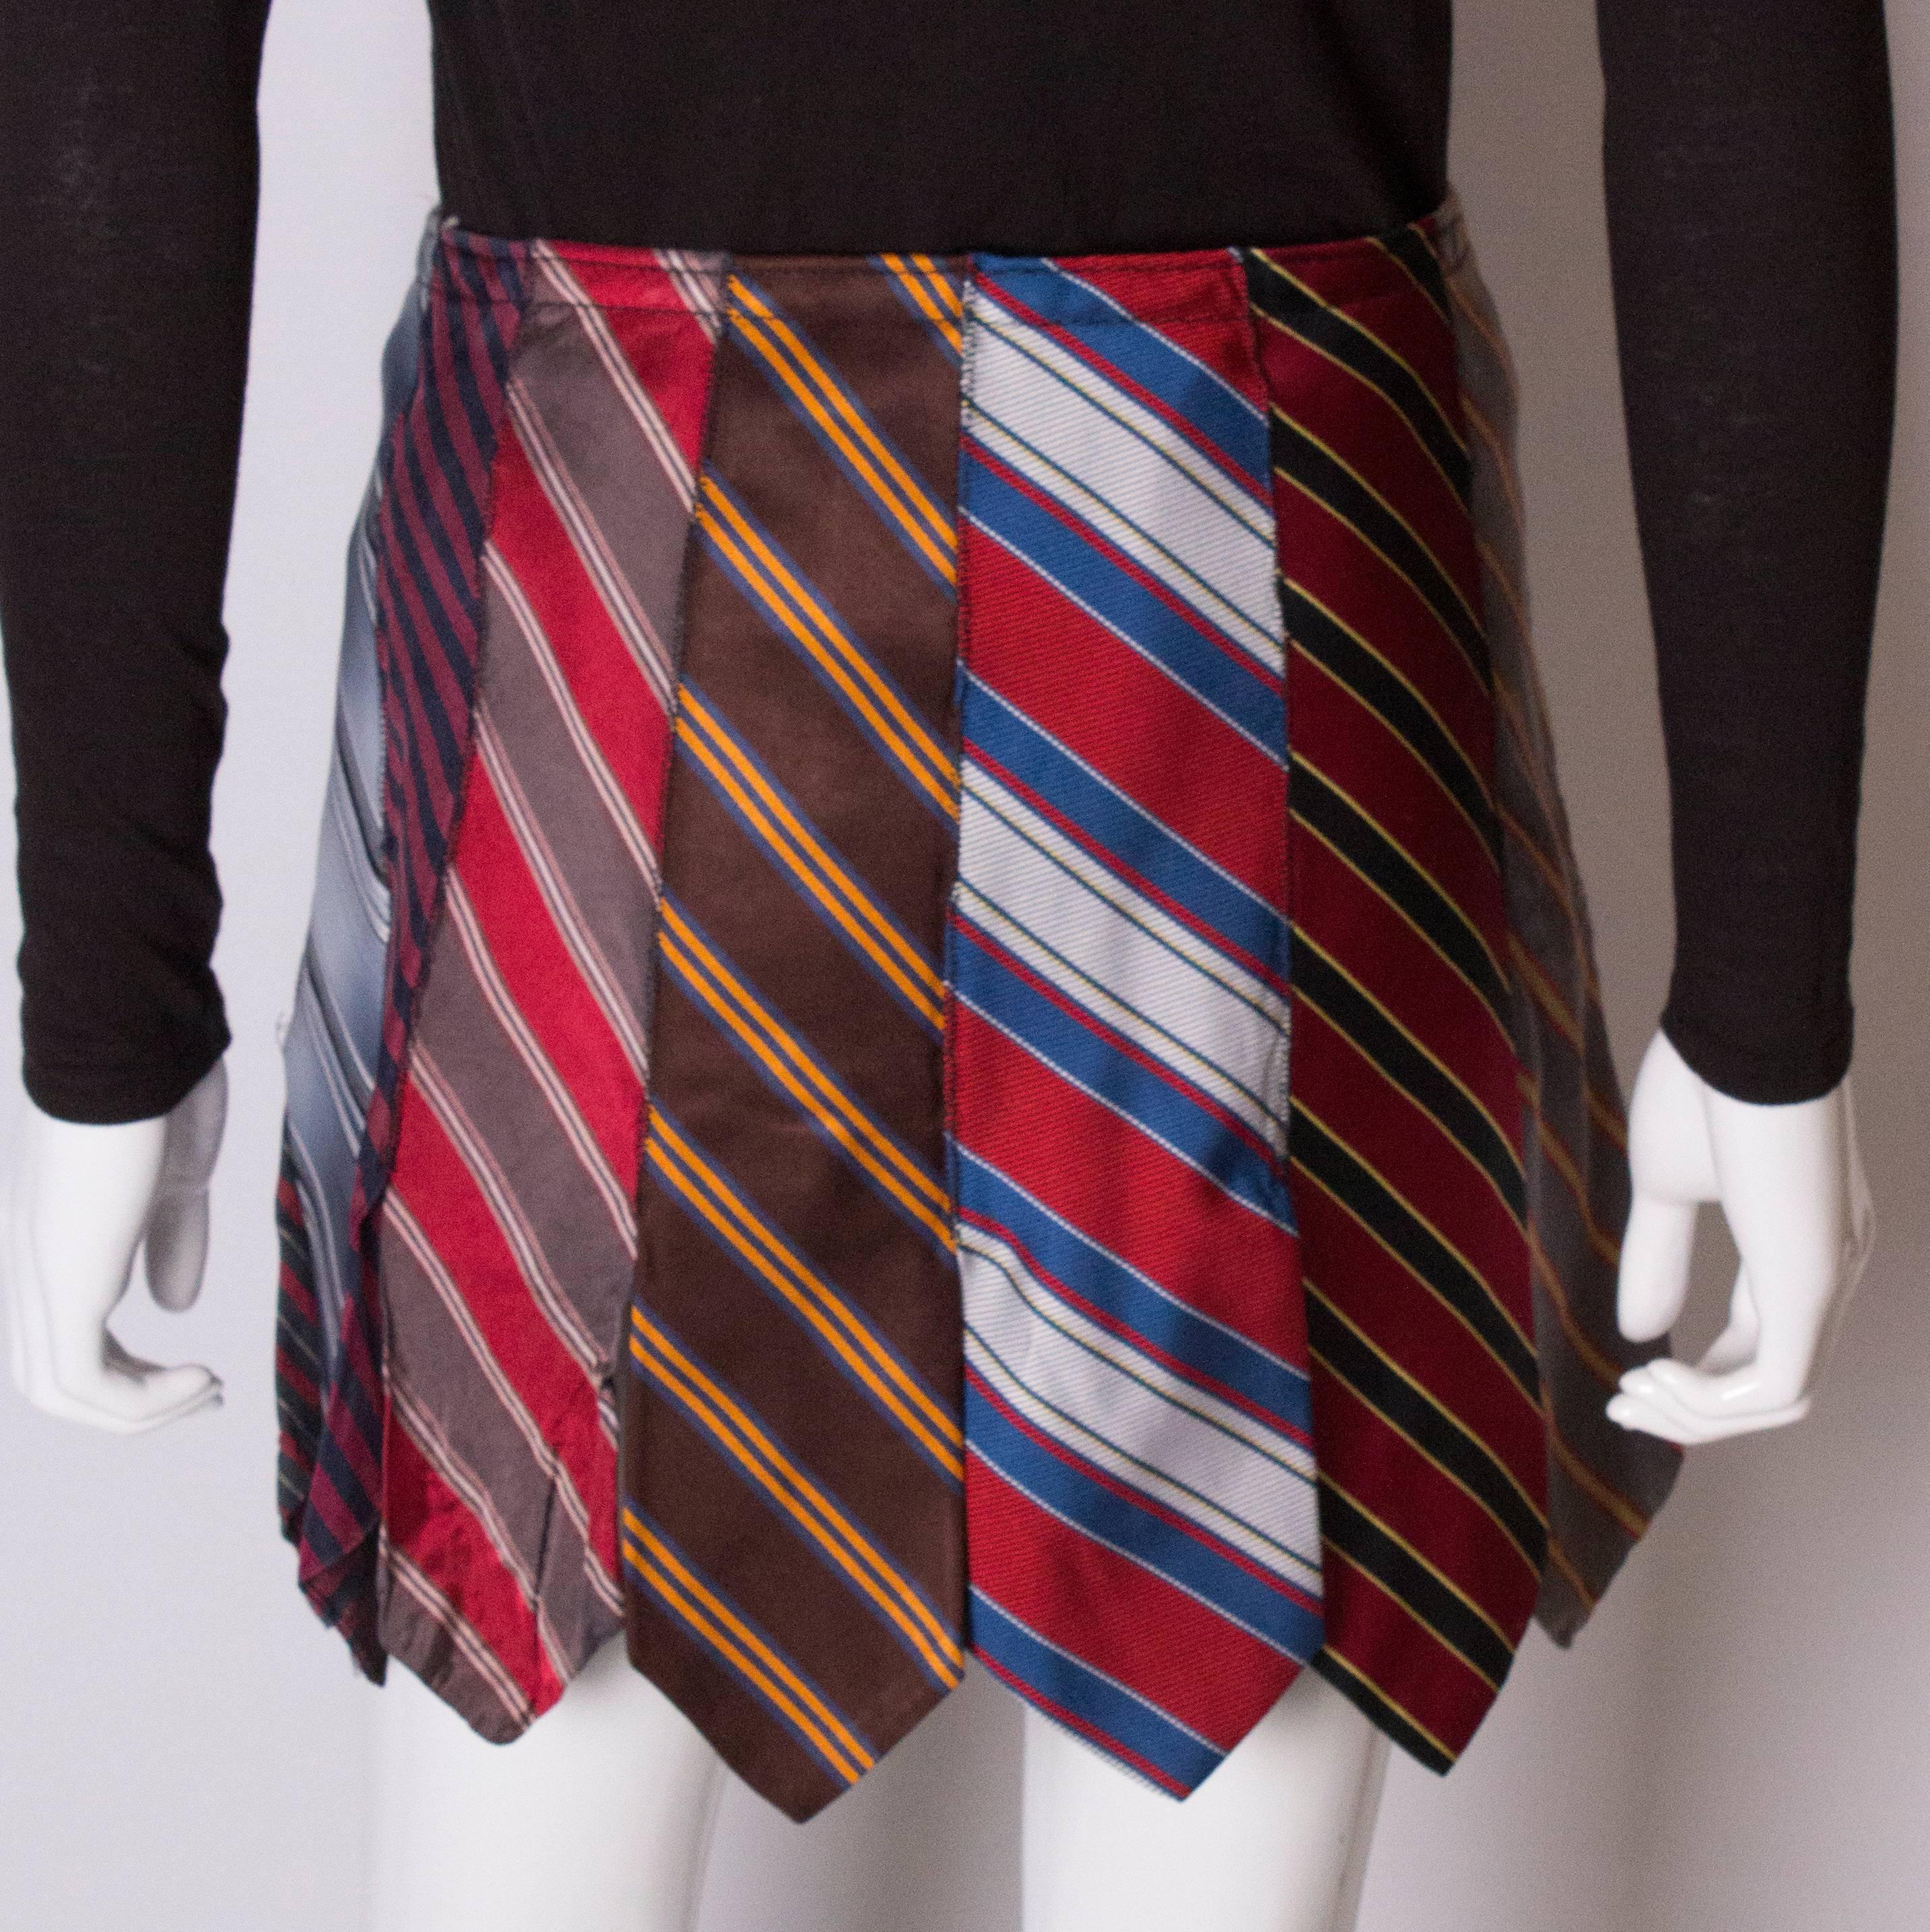 Women's A Vintage Novelty Skirt made out of Silk Ties